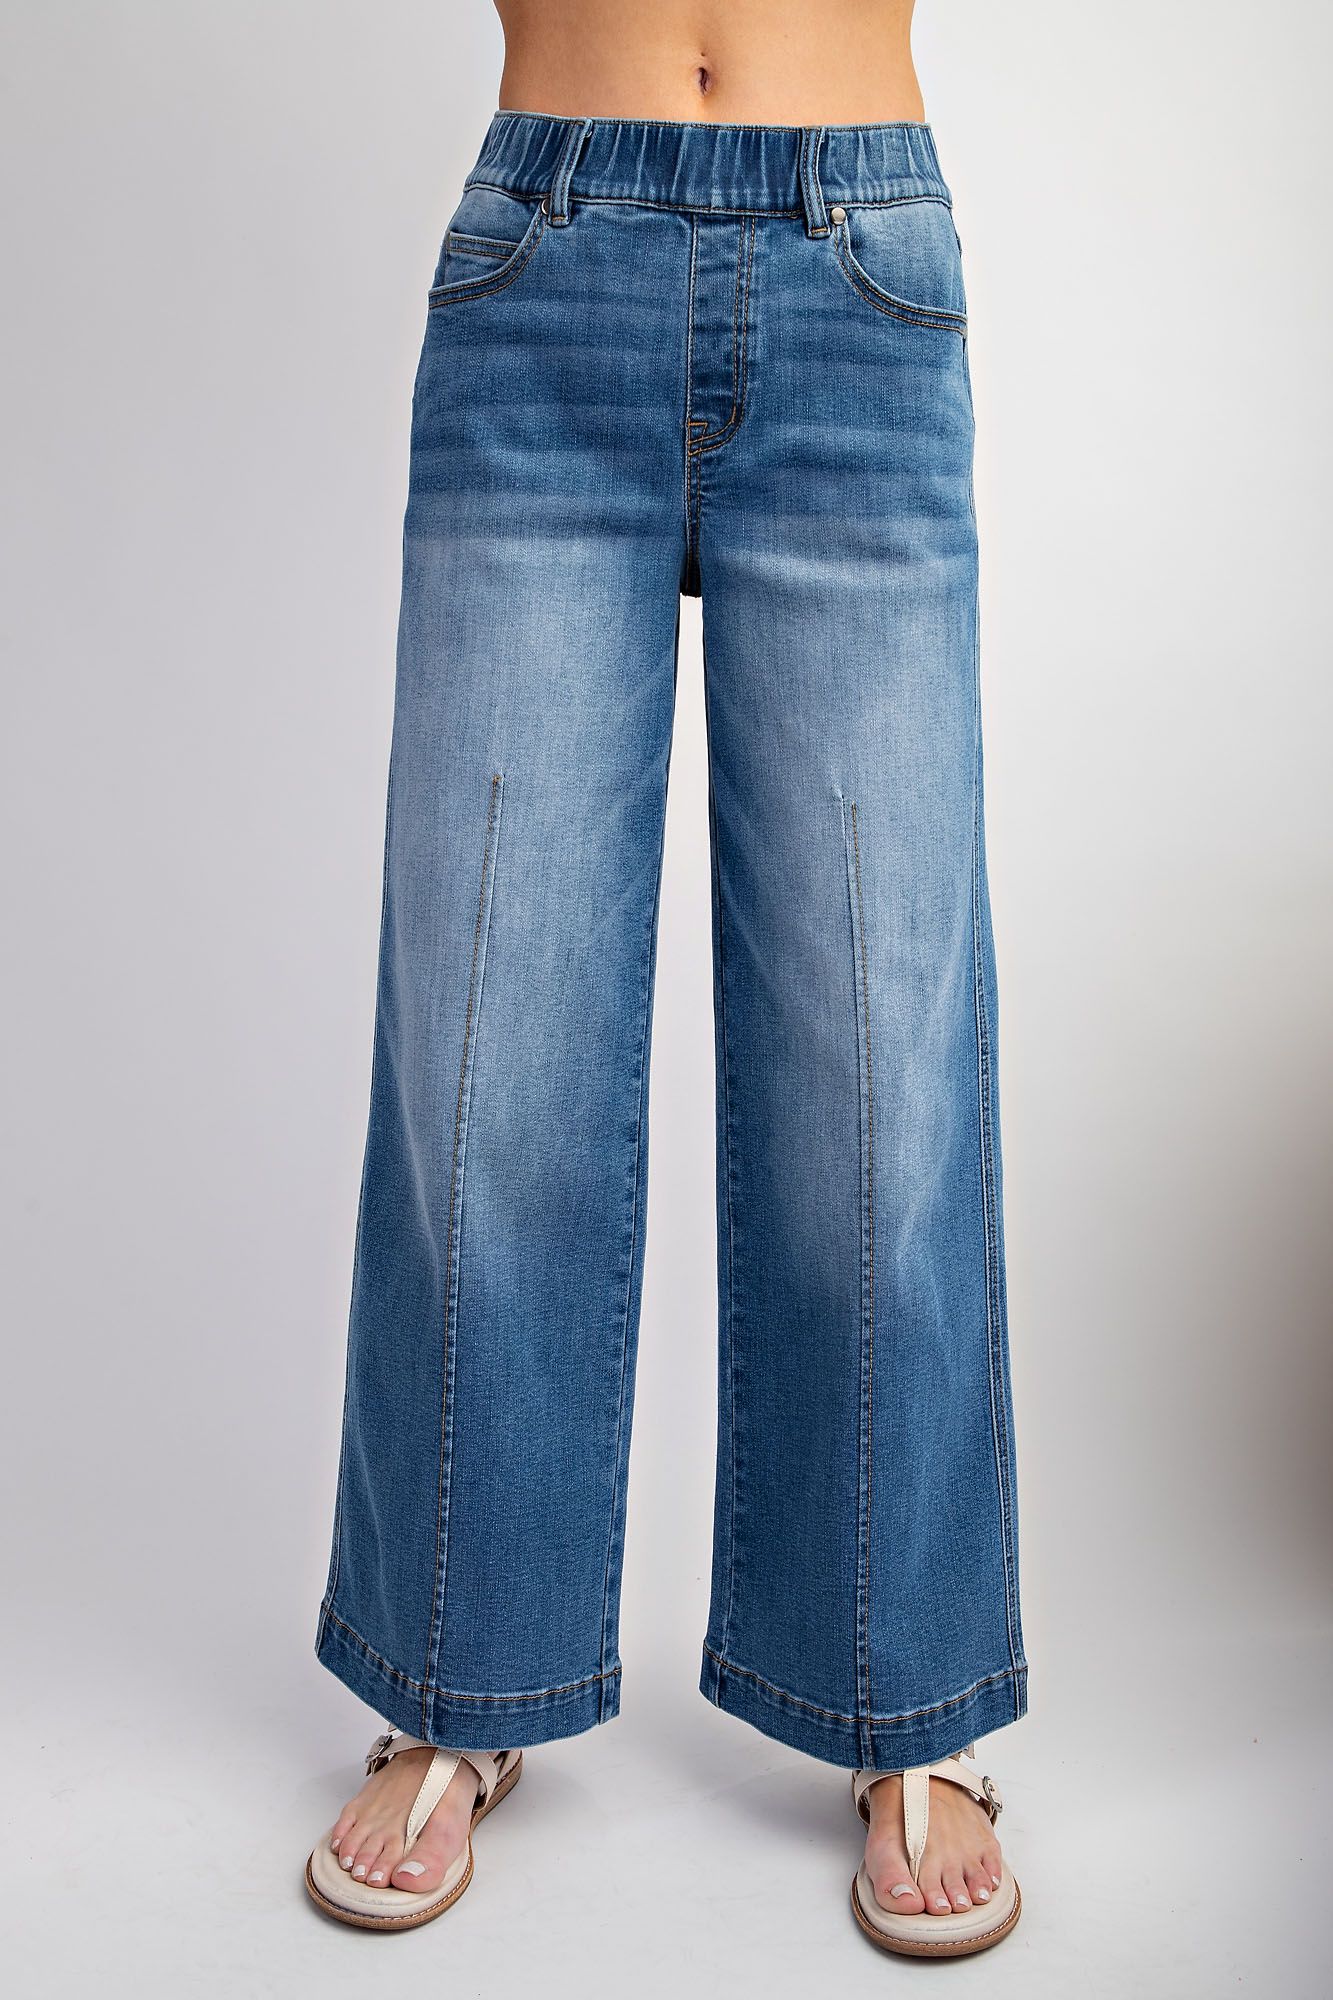 Blakely's Best Denim Pant 2 Colors (1X to 3X)